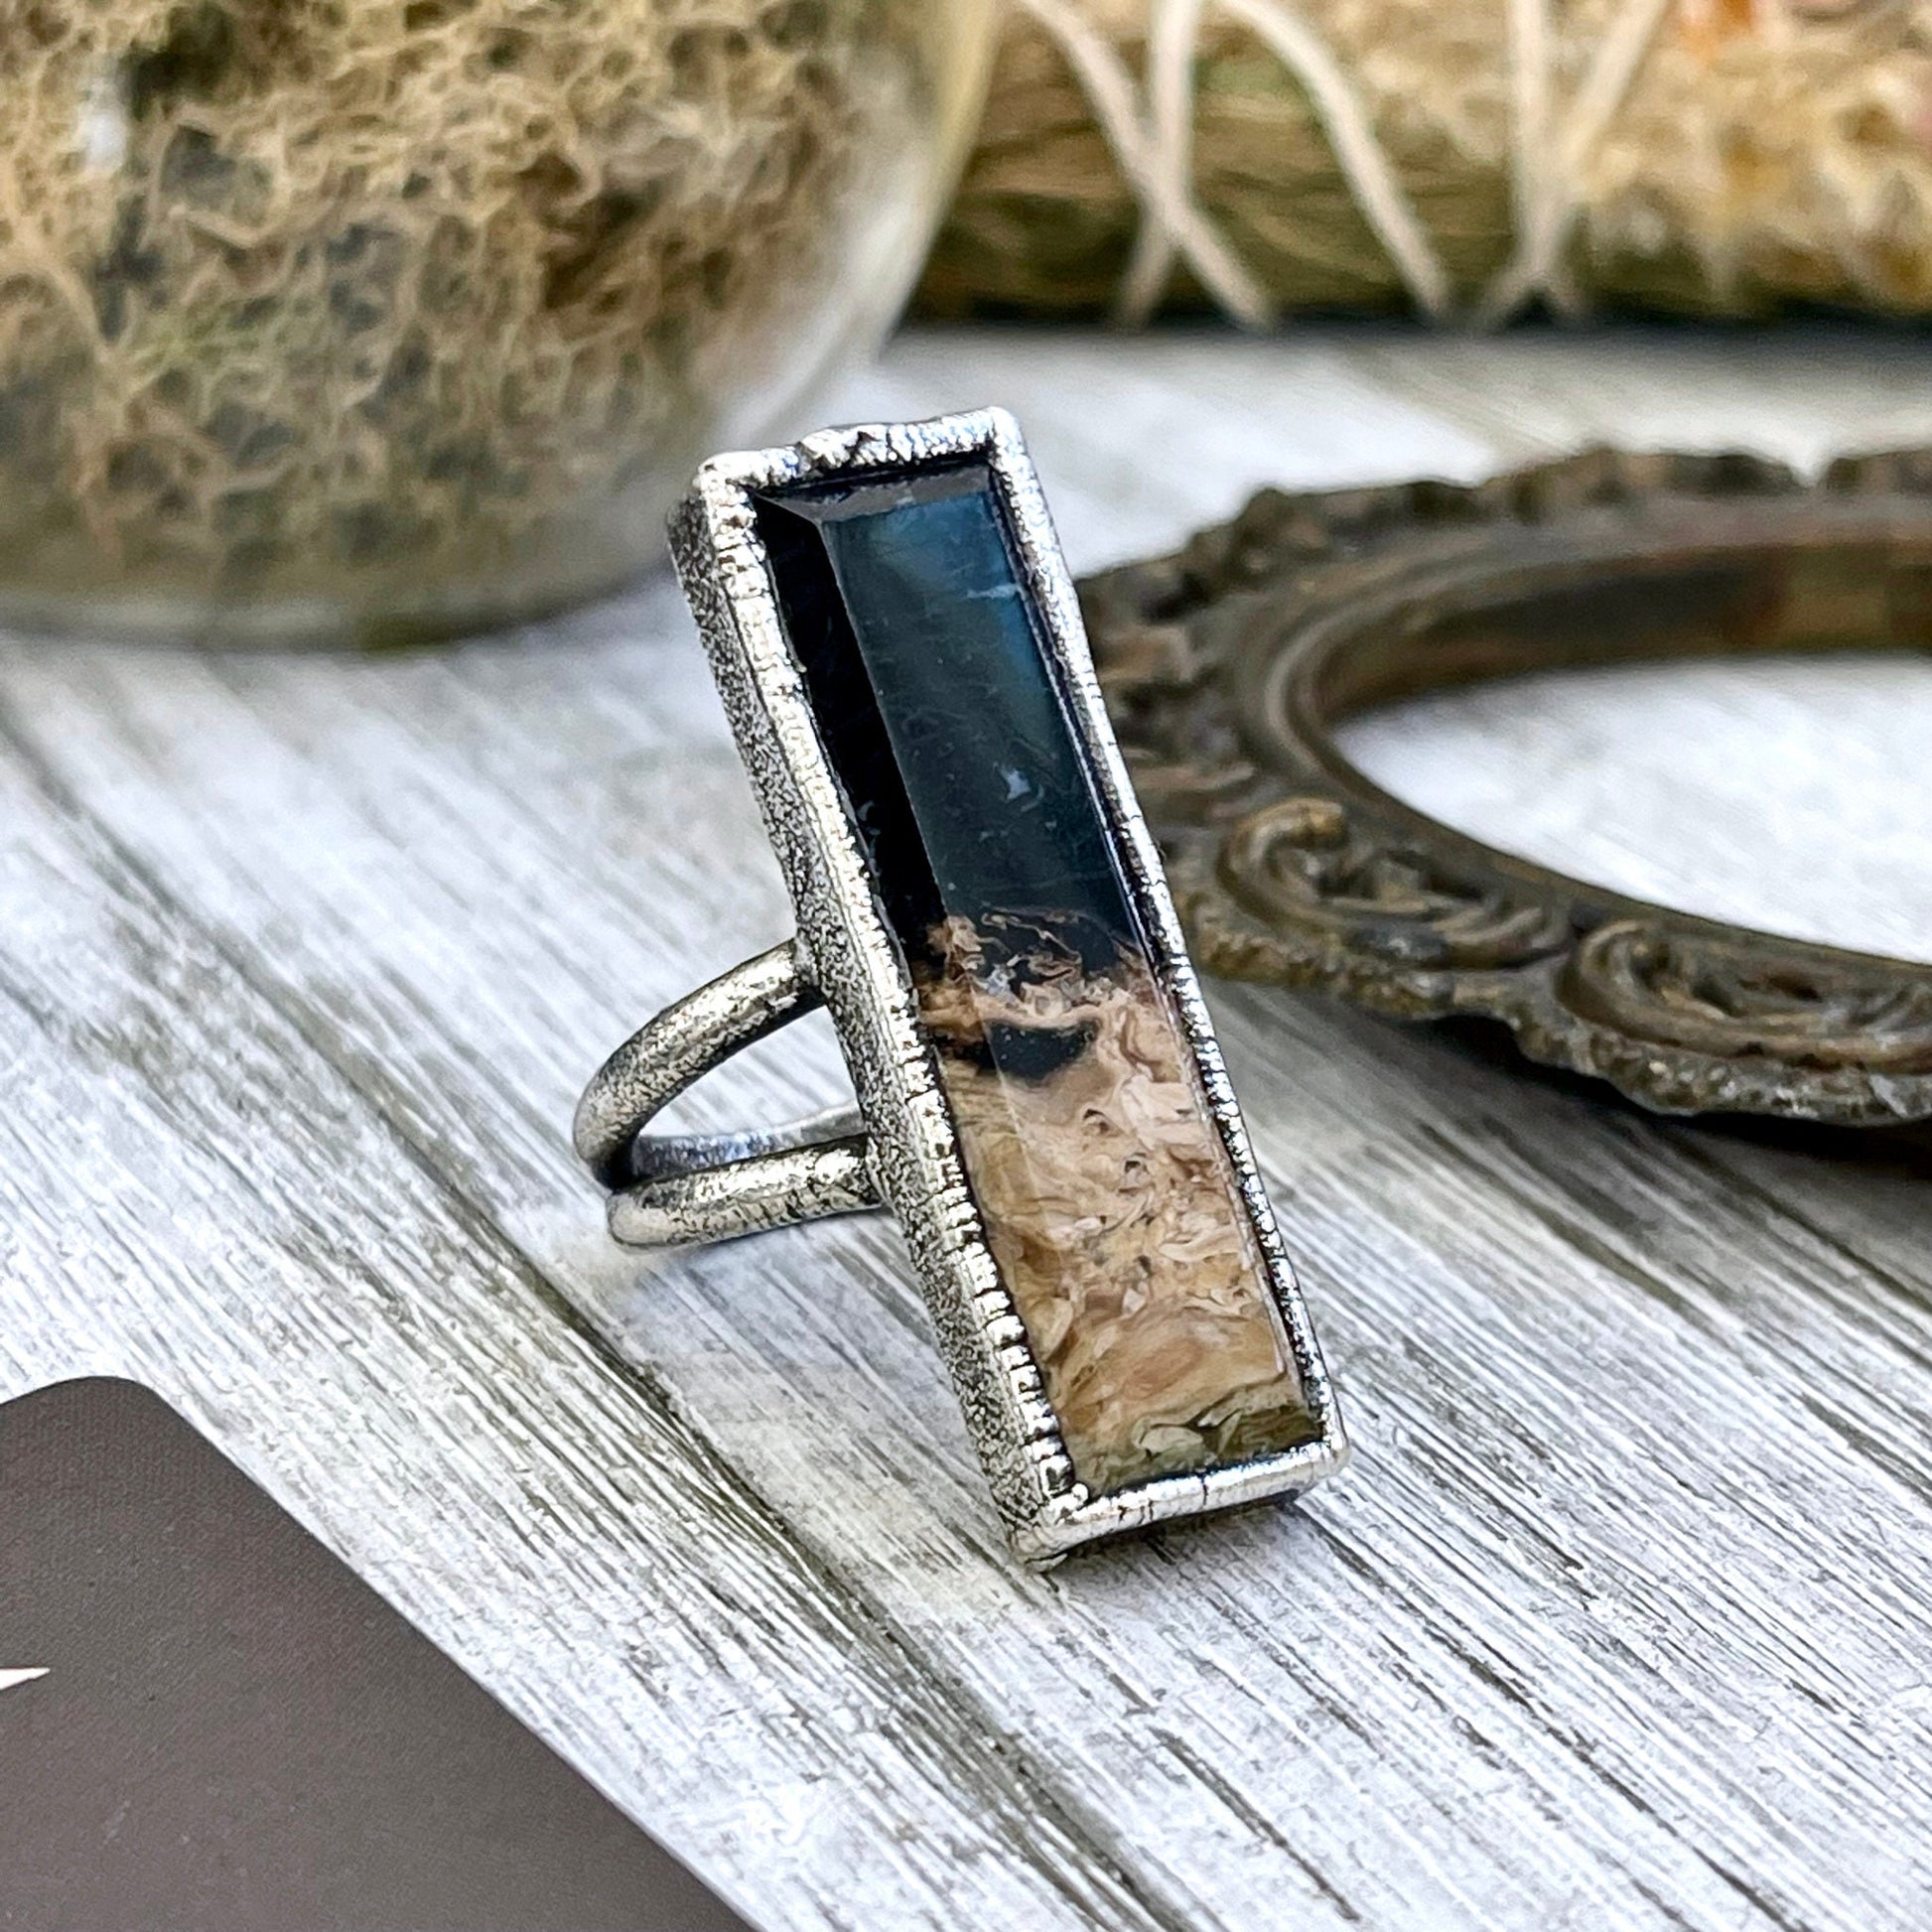 Big Bold Jewelry, Big Crystal Ring, Big Silver Ring, Big Stone Ring, Etsy ID: 1315703140, Fossilized Palm Root, FOXLARK- RINGS, Jewelry, Large Boho Ring, Large Crystal Ring, Large Stone Ring, Natural stone ring, Rings, silver crystal ring, Silver Stone Je